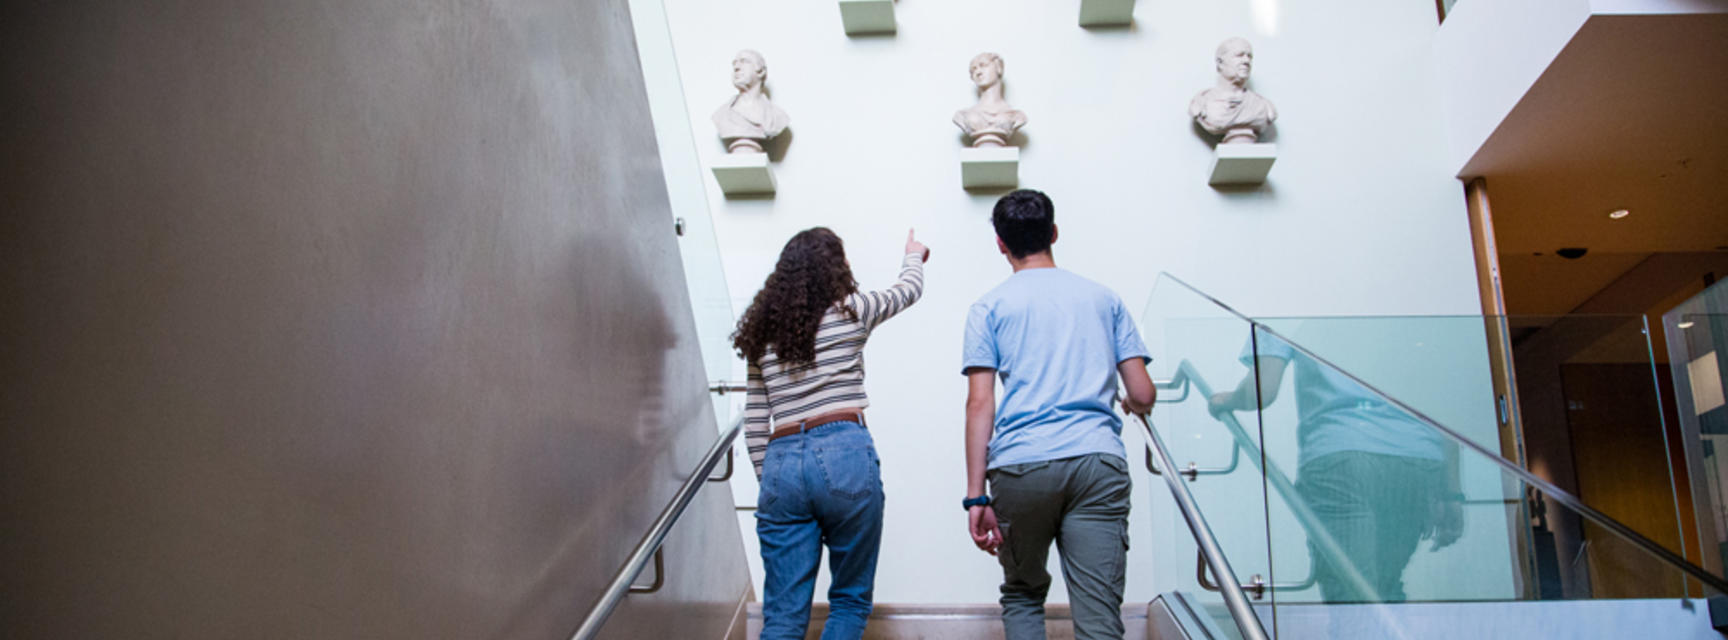 View from behind to museum visitors ascending a staircase, with busts on the wall in front of them